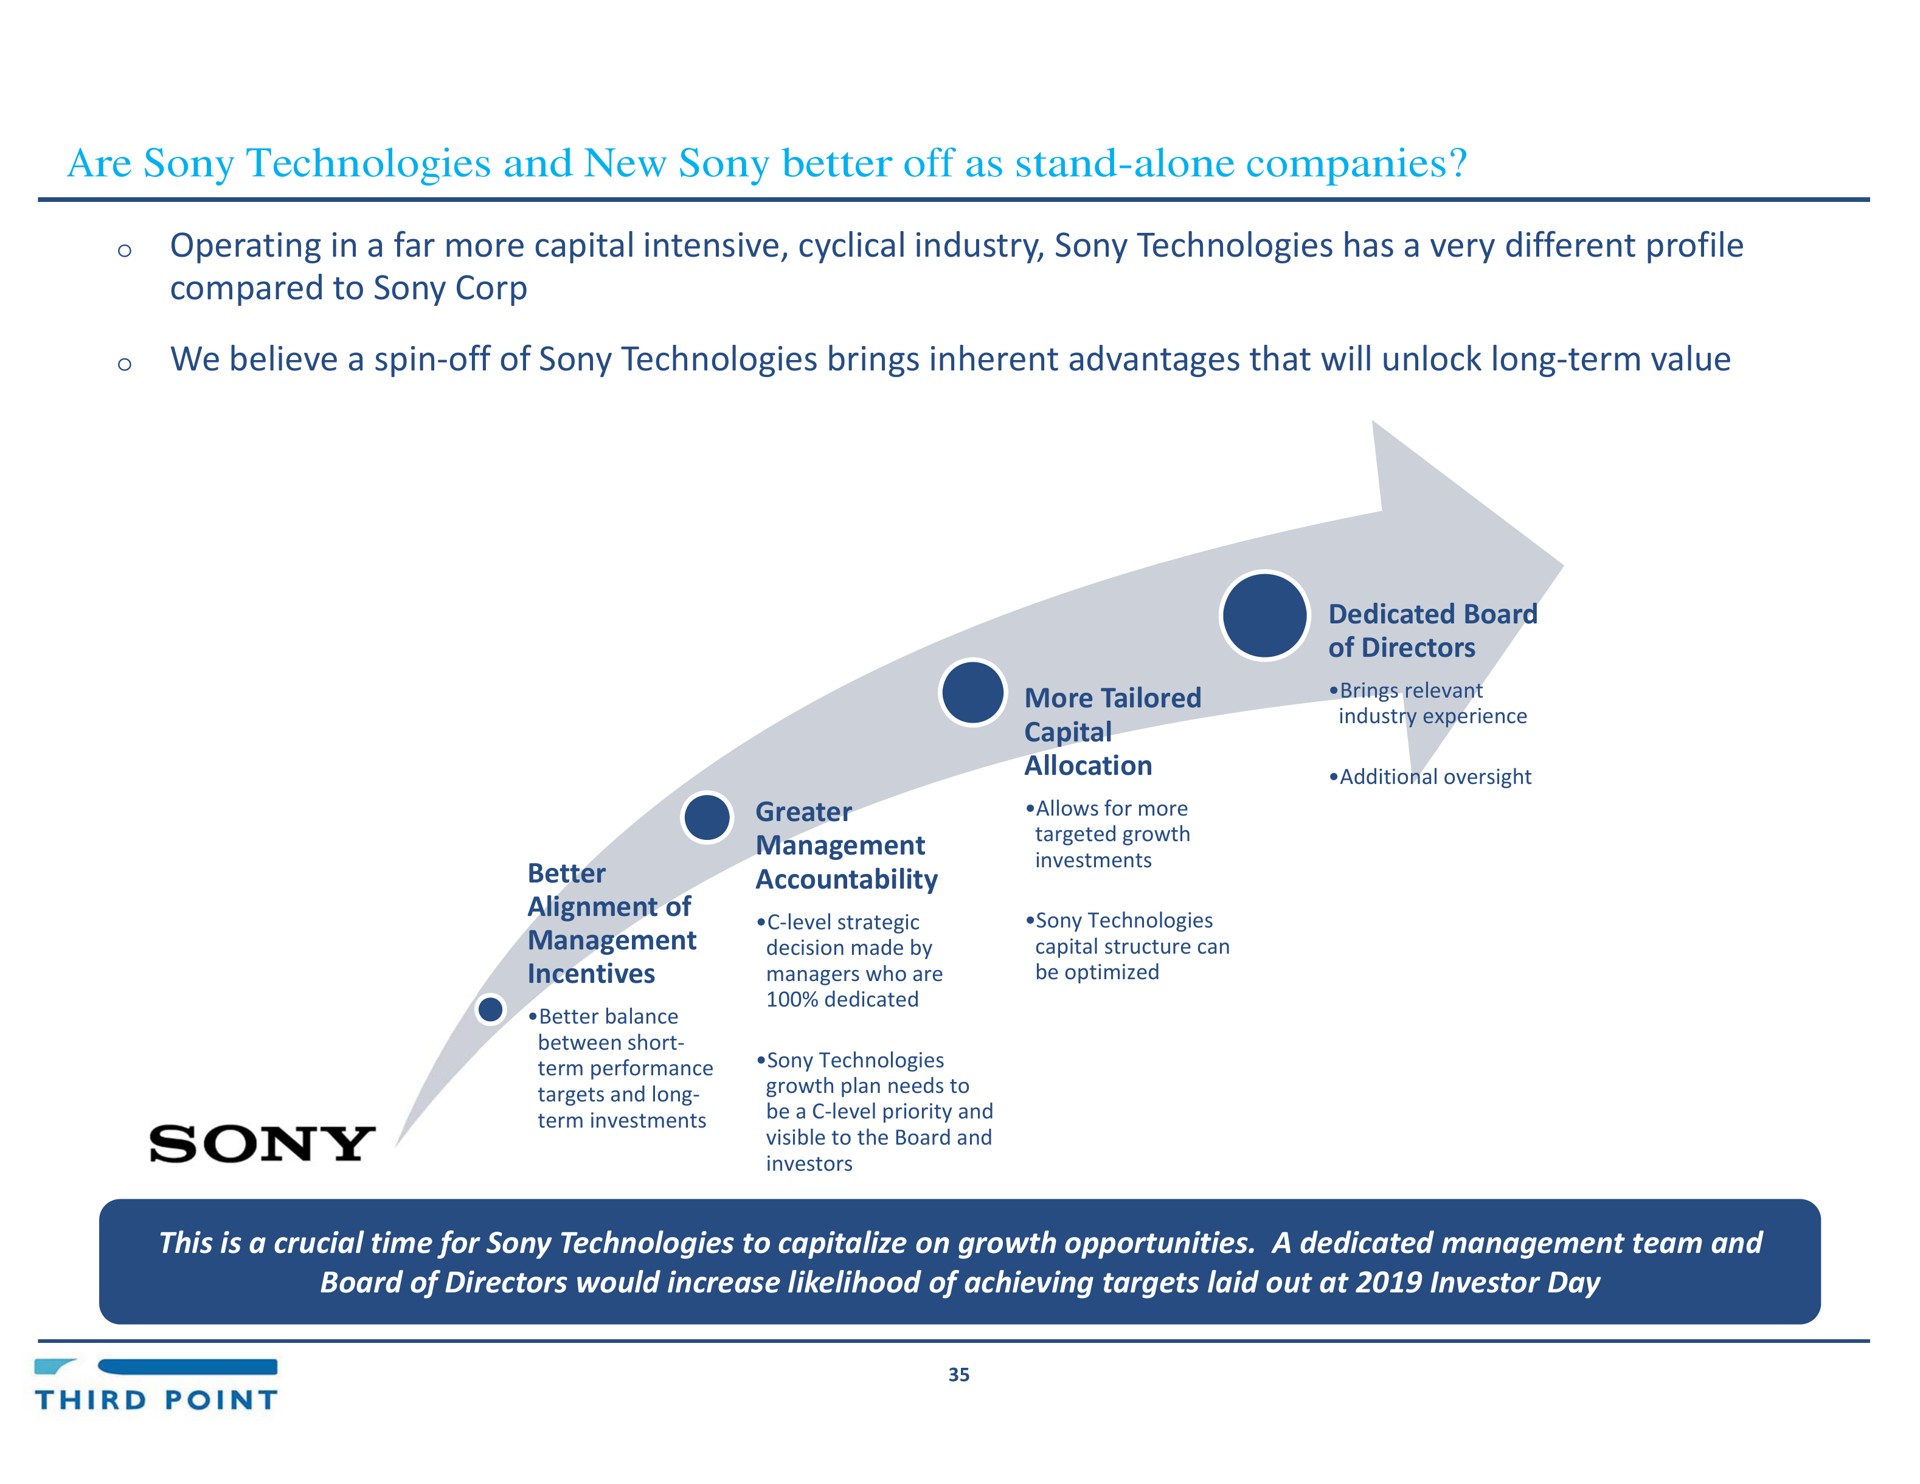 are technologies and new better off as stand alone companies operating in a far more capital intensive cyclical industry technologies has a very different profile compared to corp we believe a spin off of technologies brings inherent advantages that will unlock long term value this is a crucial time for technologies to capitalize on growth opportunities a dedicated management team and board of directors would increase likelihood of achieving targets laid out at investor day spin off long term accountability | Third Point Management